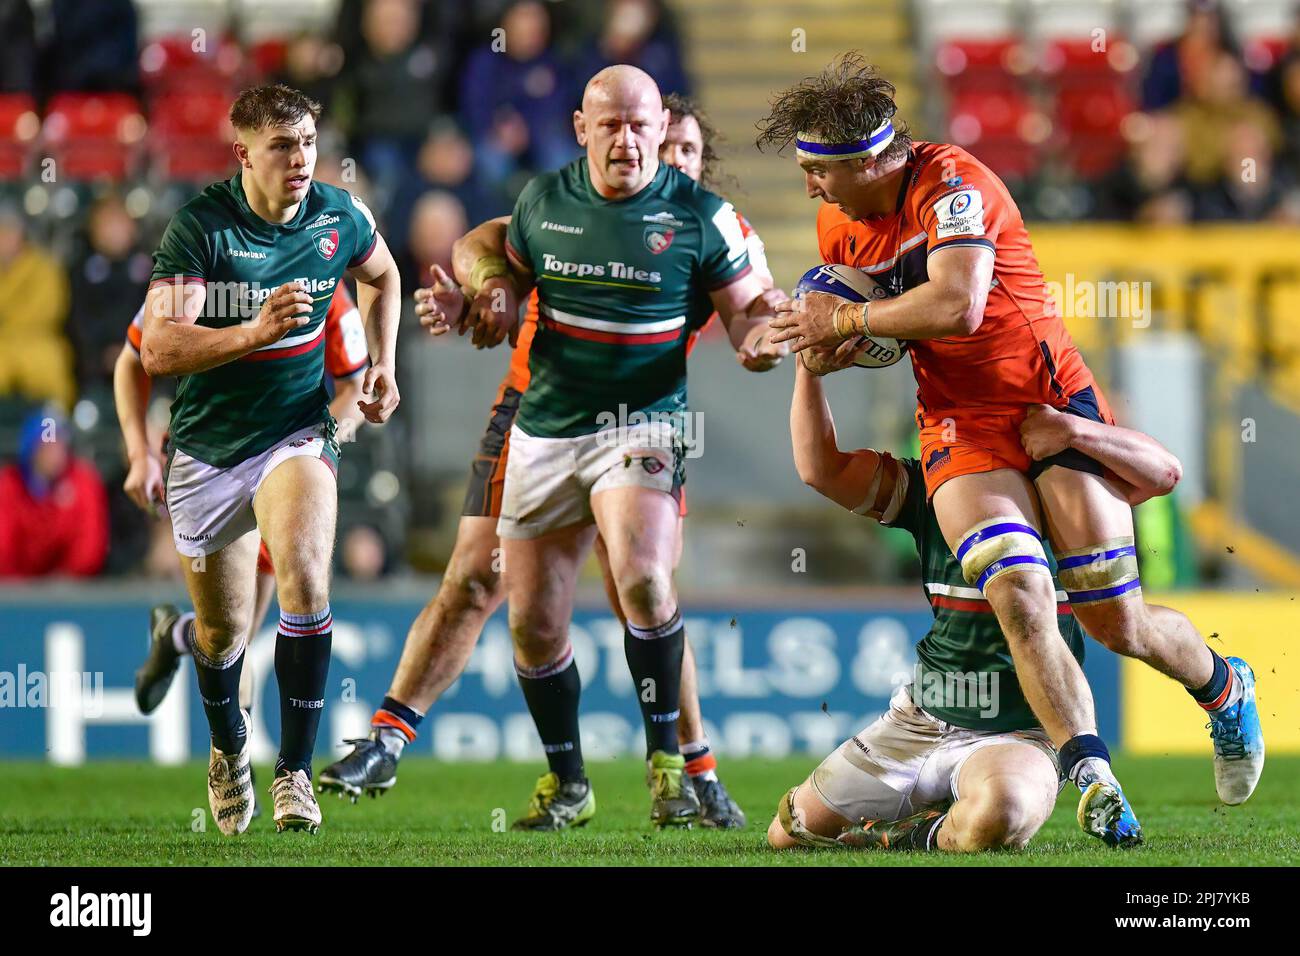 Leicester Tigers Rugby v Edinburgh Rugby Team at the Mattioli Stadium in Leicester, UK on 31 March 2023.  Jamie Ritchie (Edinburgh) tackled at the Mattioli Rugby Stadium, Leicester, Uk  Credit: Mark Dunn/Alamy Live News Stock Photo